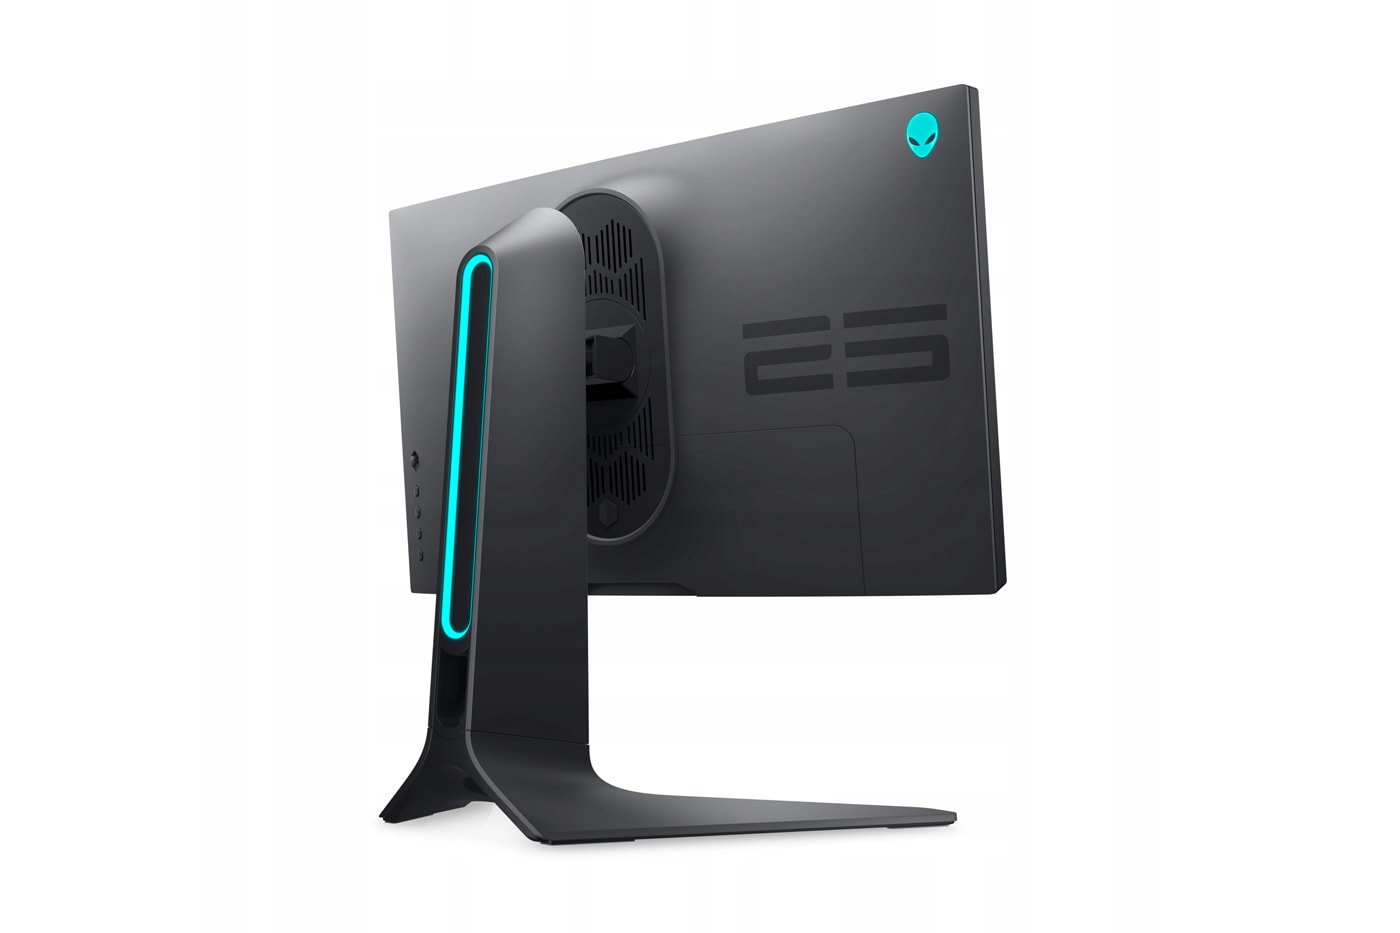 Alienware introduces its first gaming monitor with a 360Hz refresh